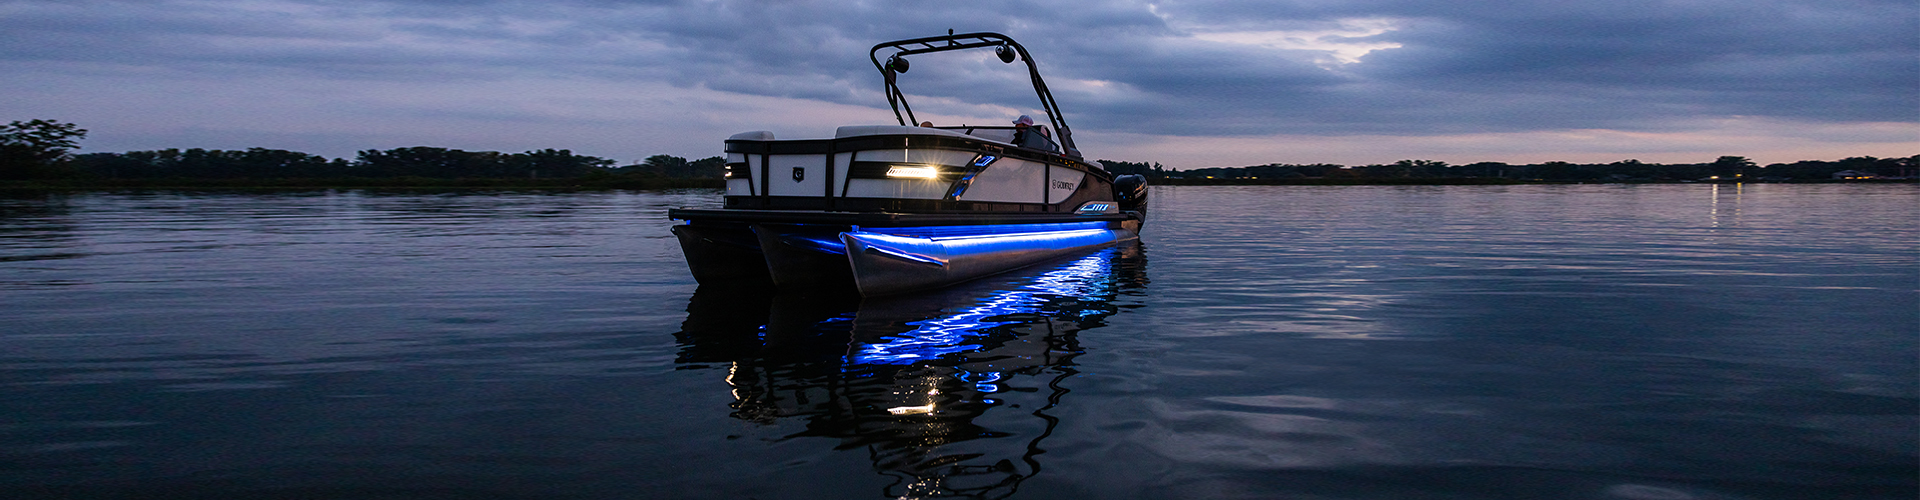 Top Boat Gadgets for a Fun and Safe Boating Experience